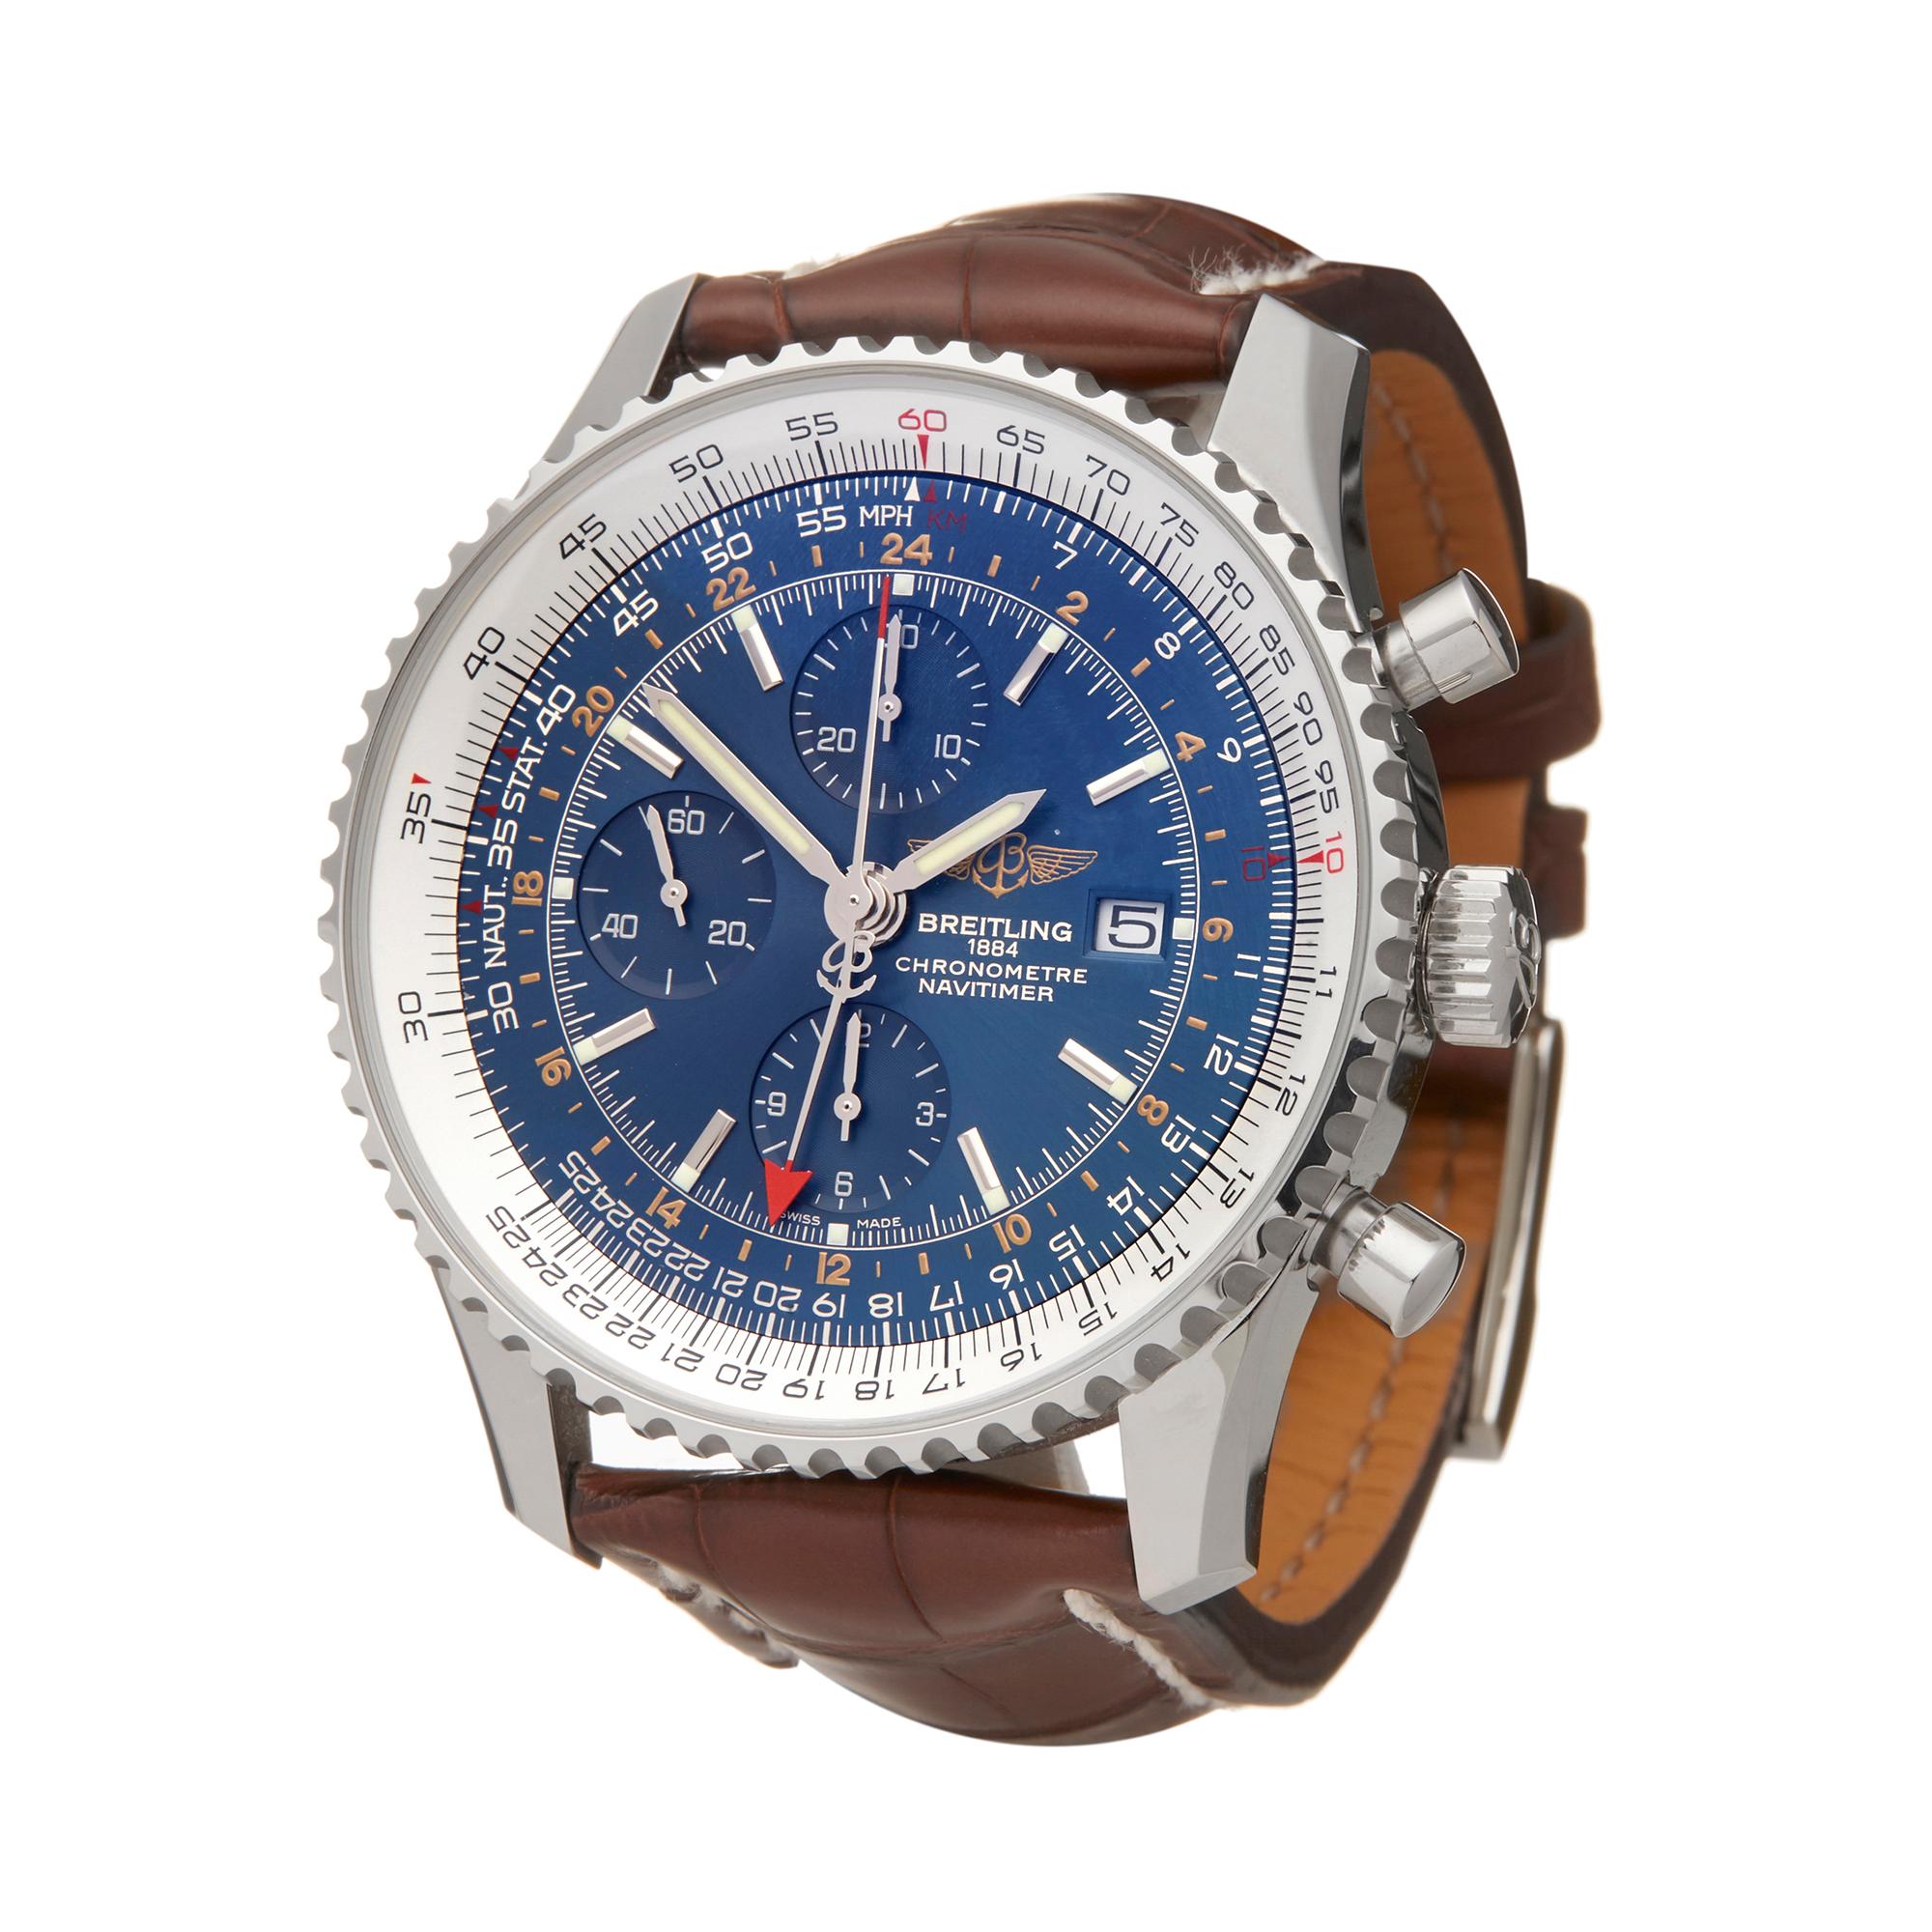 Reference: W5997
Manufacturer: Breitling
Model: Navitimer
Model Reference: A2432212/C651
Age: 7th December 2018
Gender: Men's
Box and Papers: Box, Manuals and Guarantee
Dial: Blue Baton
Glass: Sapphire Crystal
Movement: Automatic
Water Resistance: